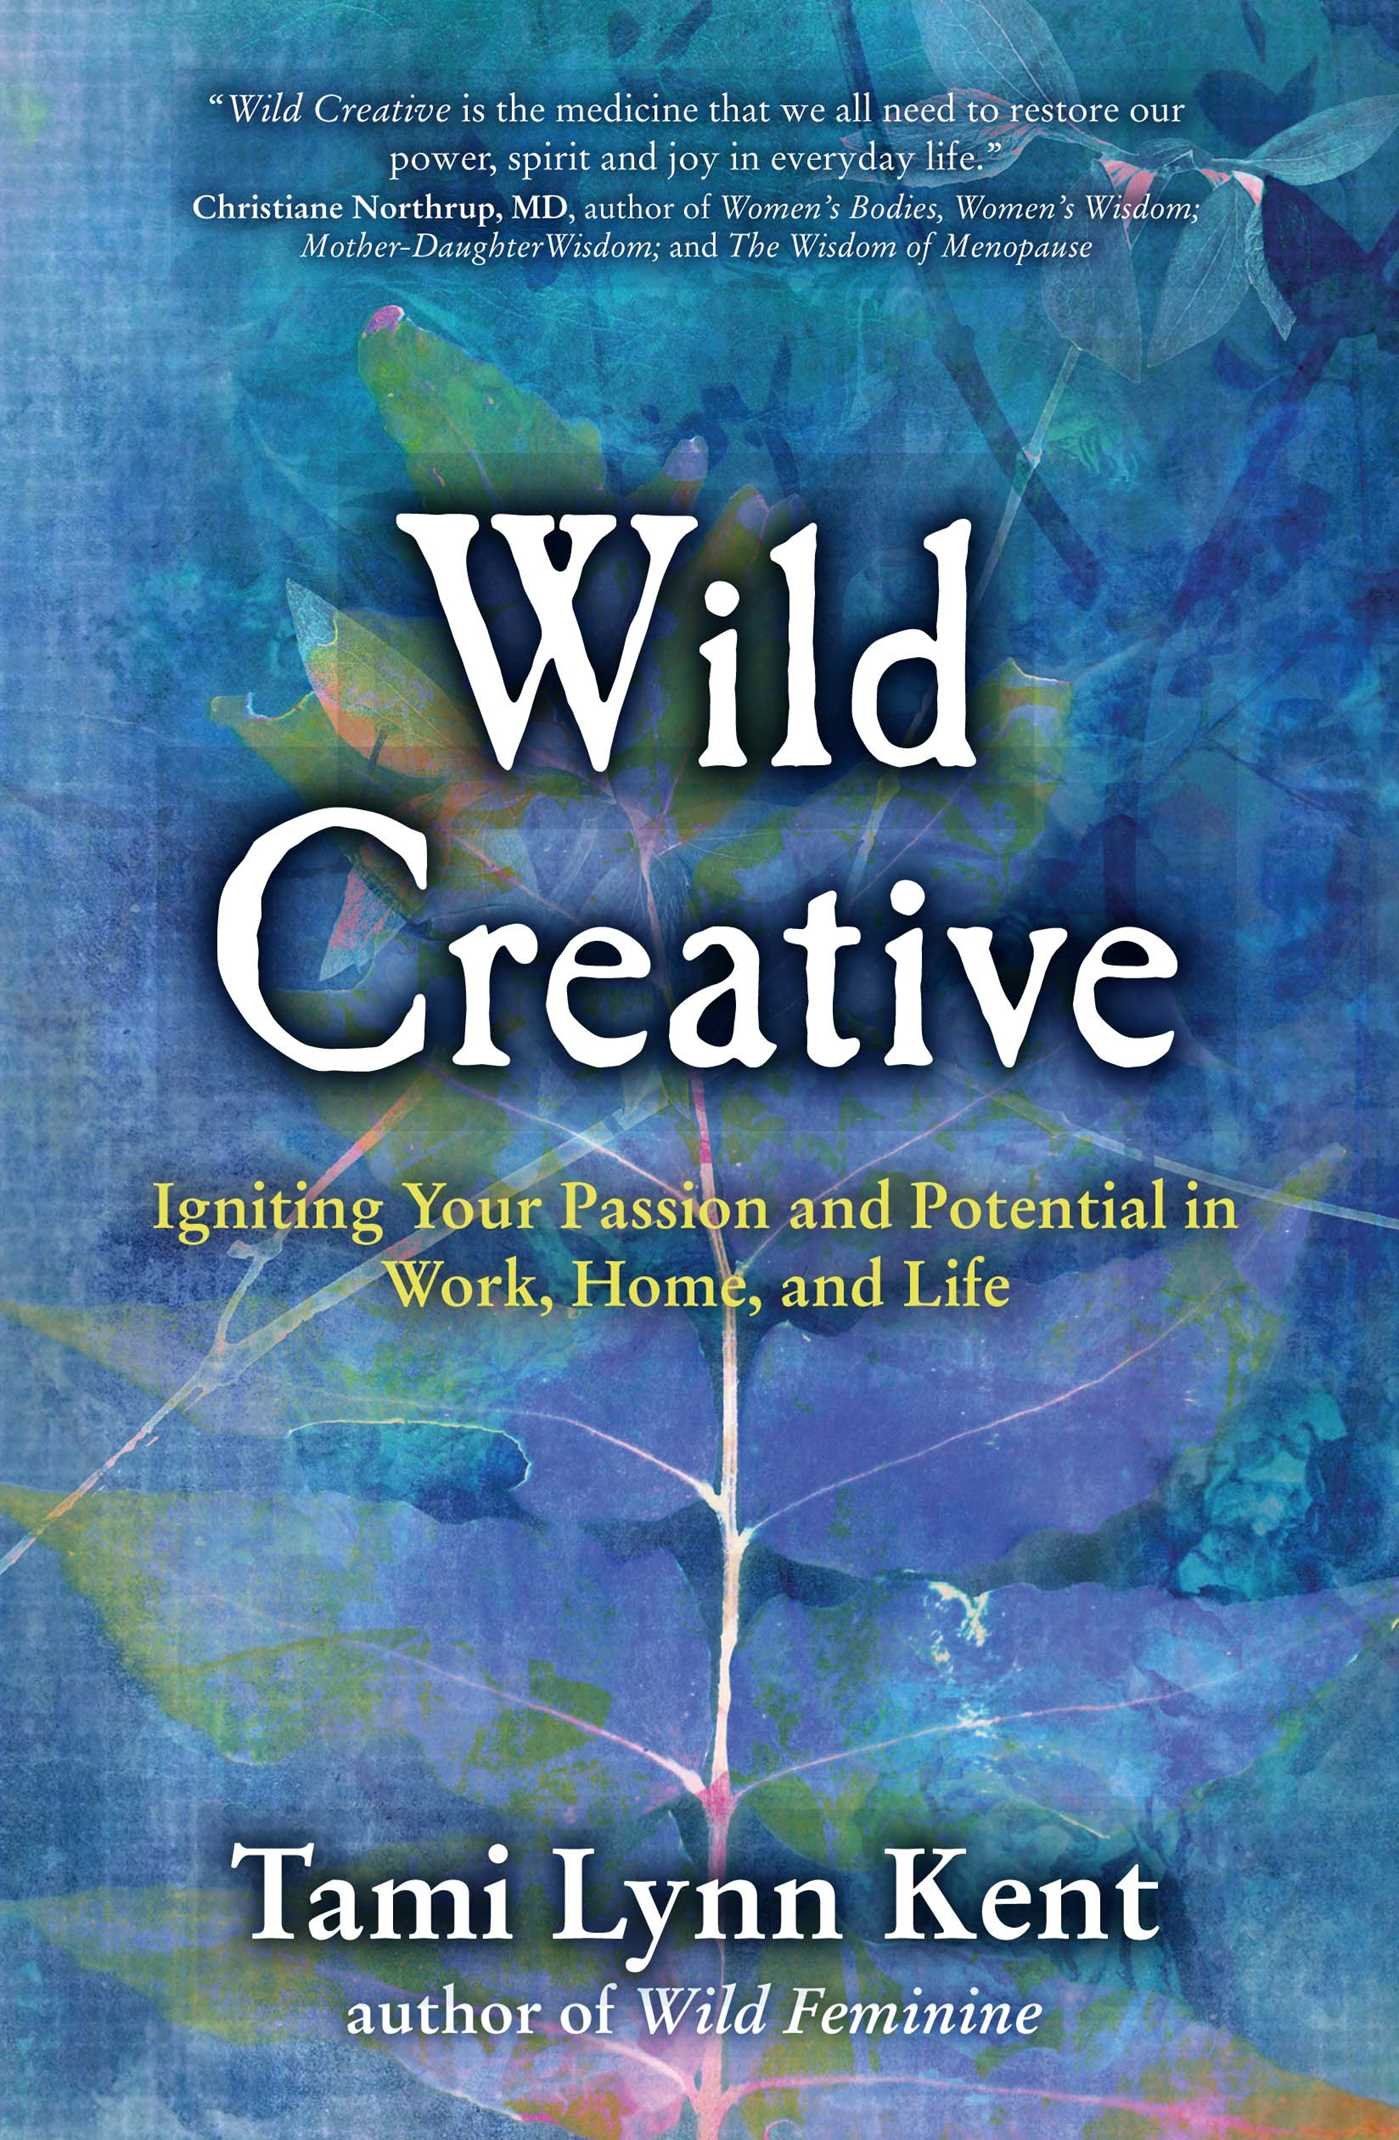 Book cover of Wild Creative by Tami Lynn Kent, featuring colorful artistic elements